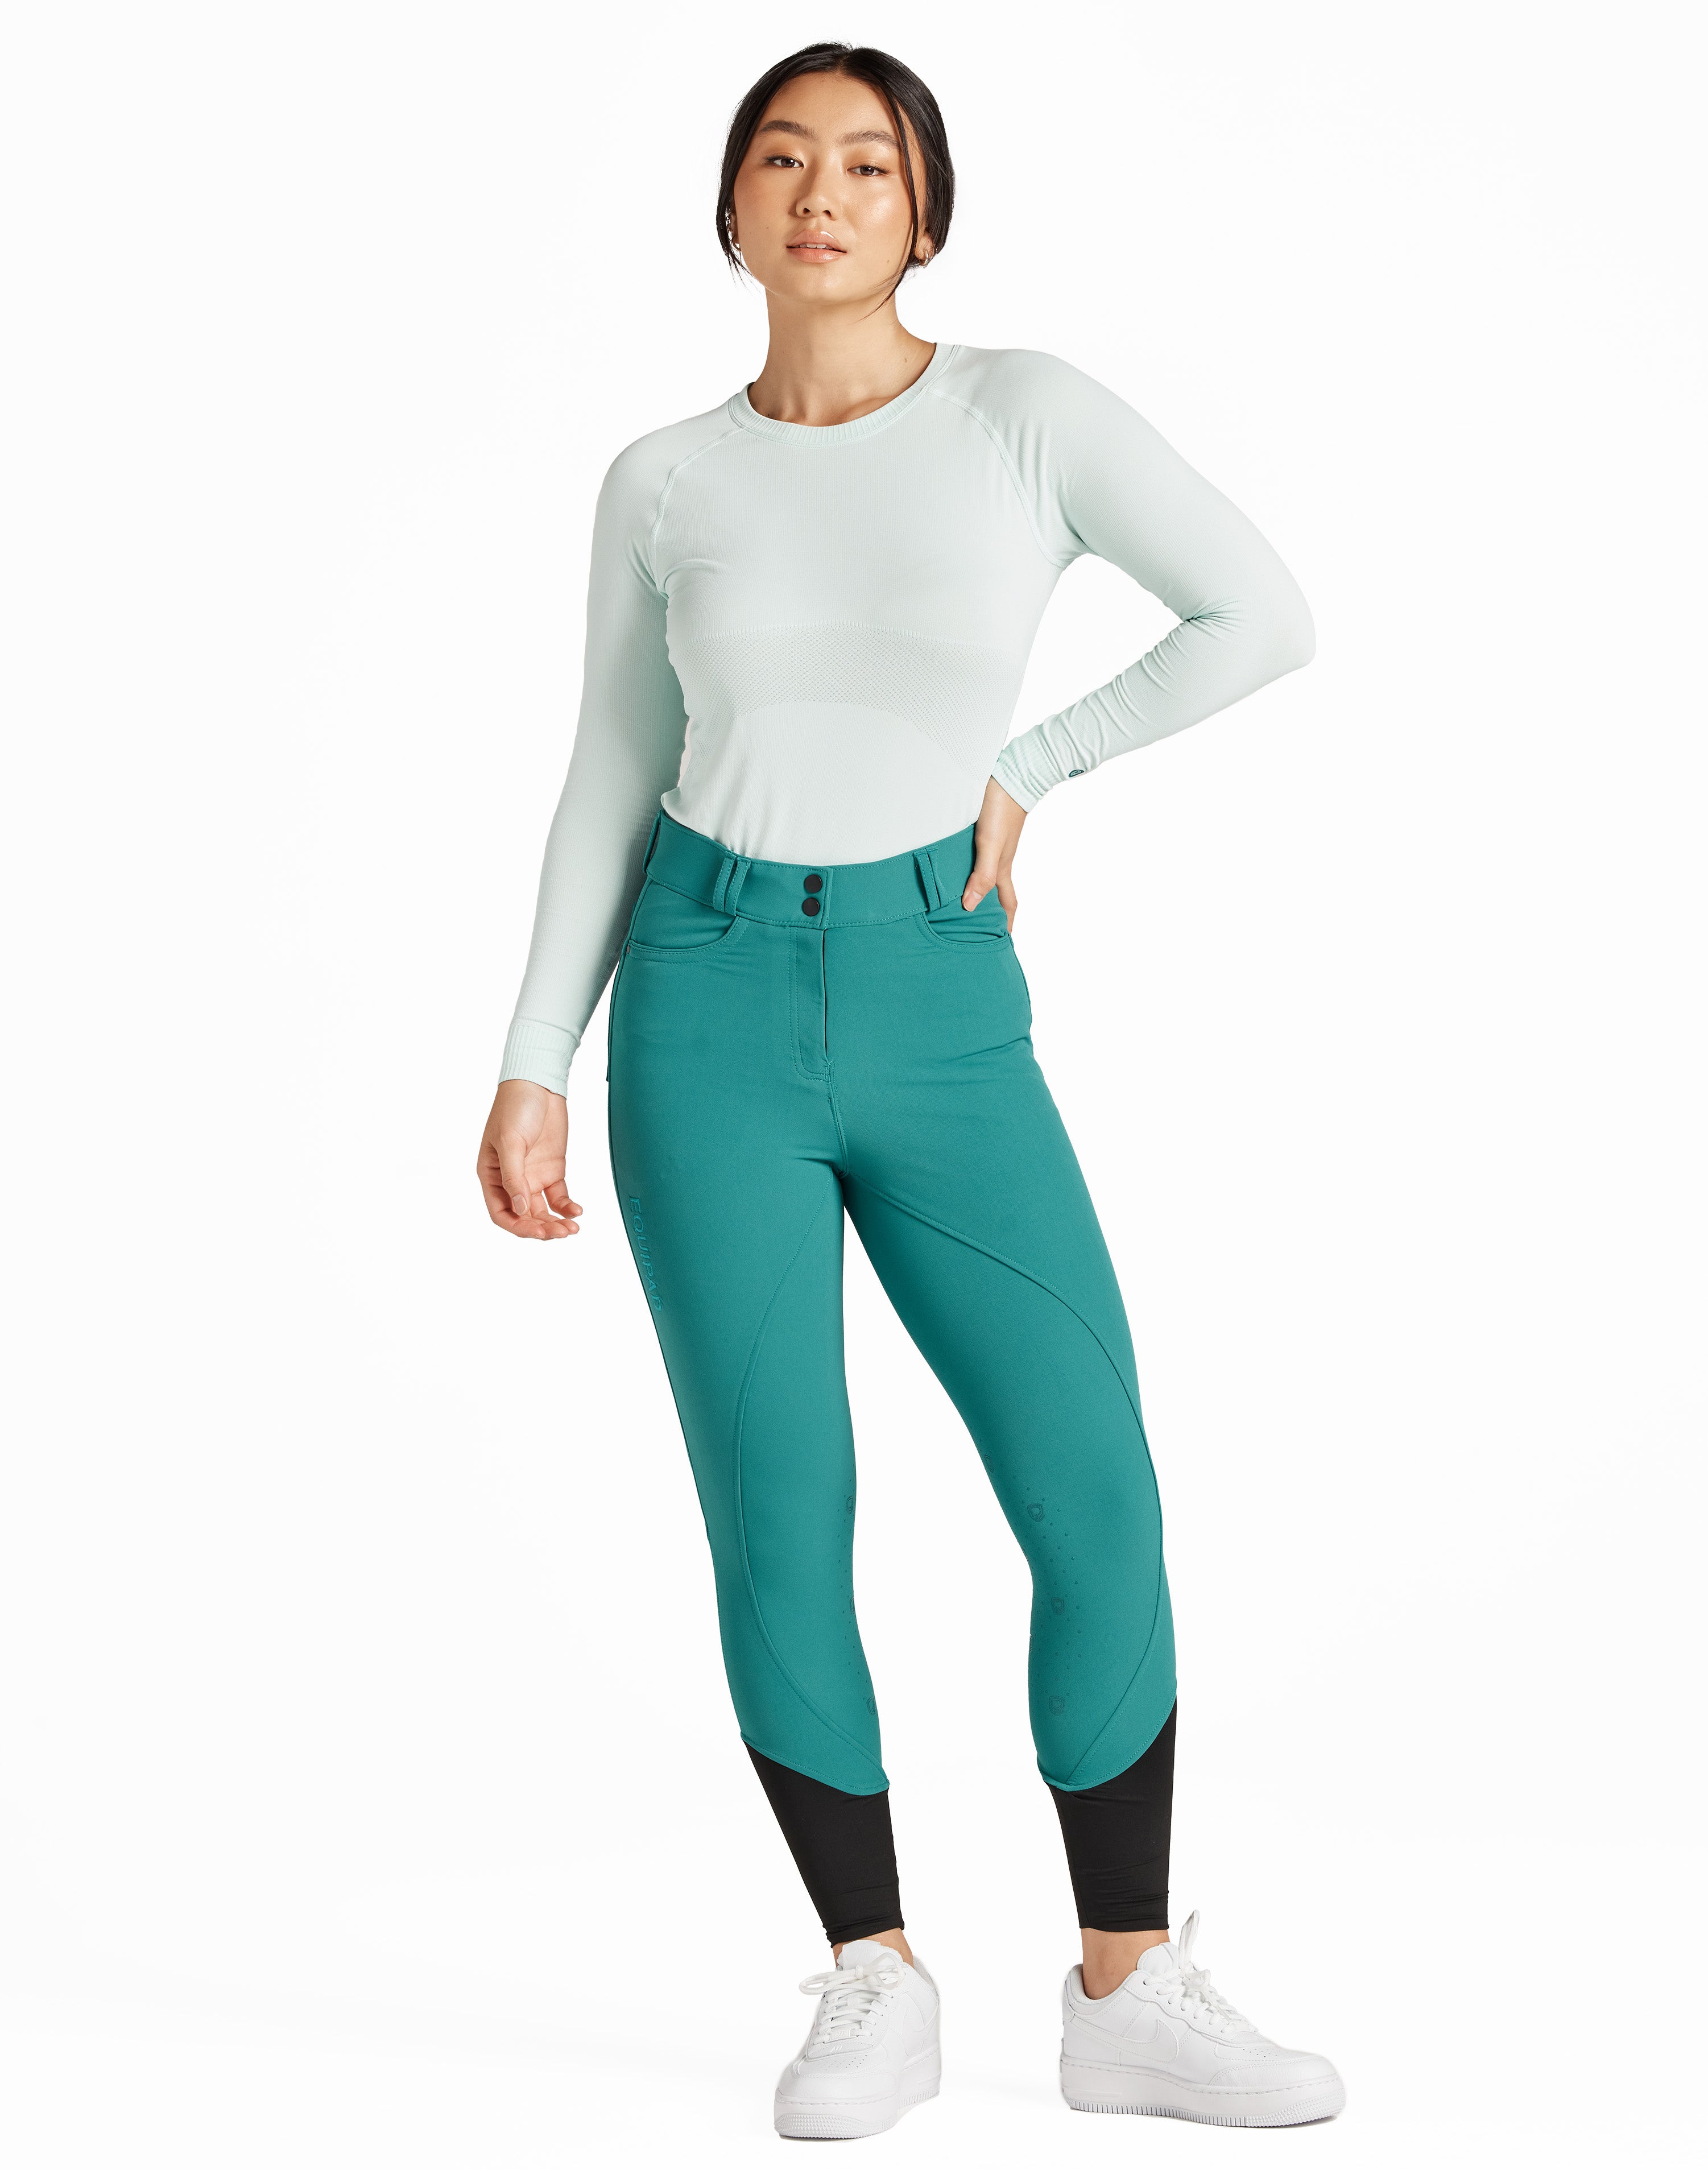 The Breeches - Teal